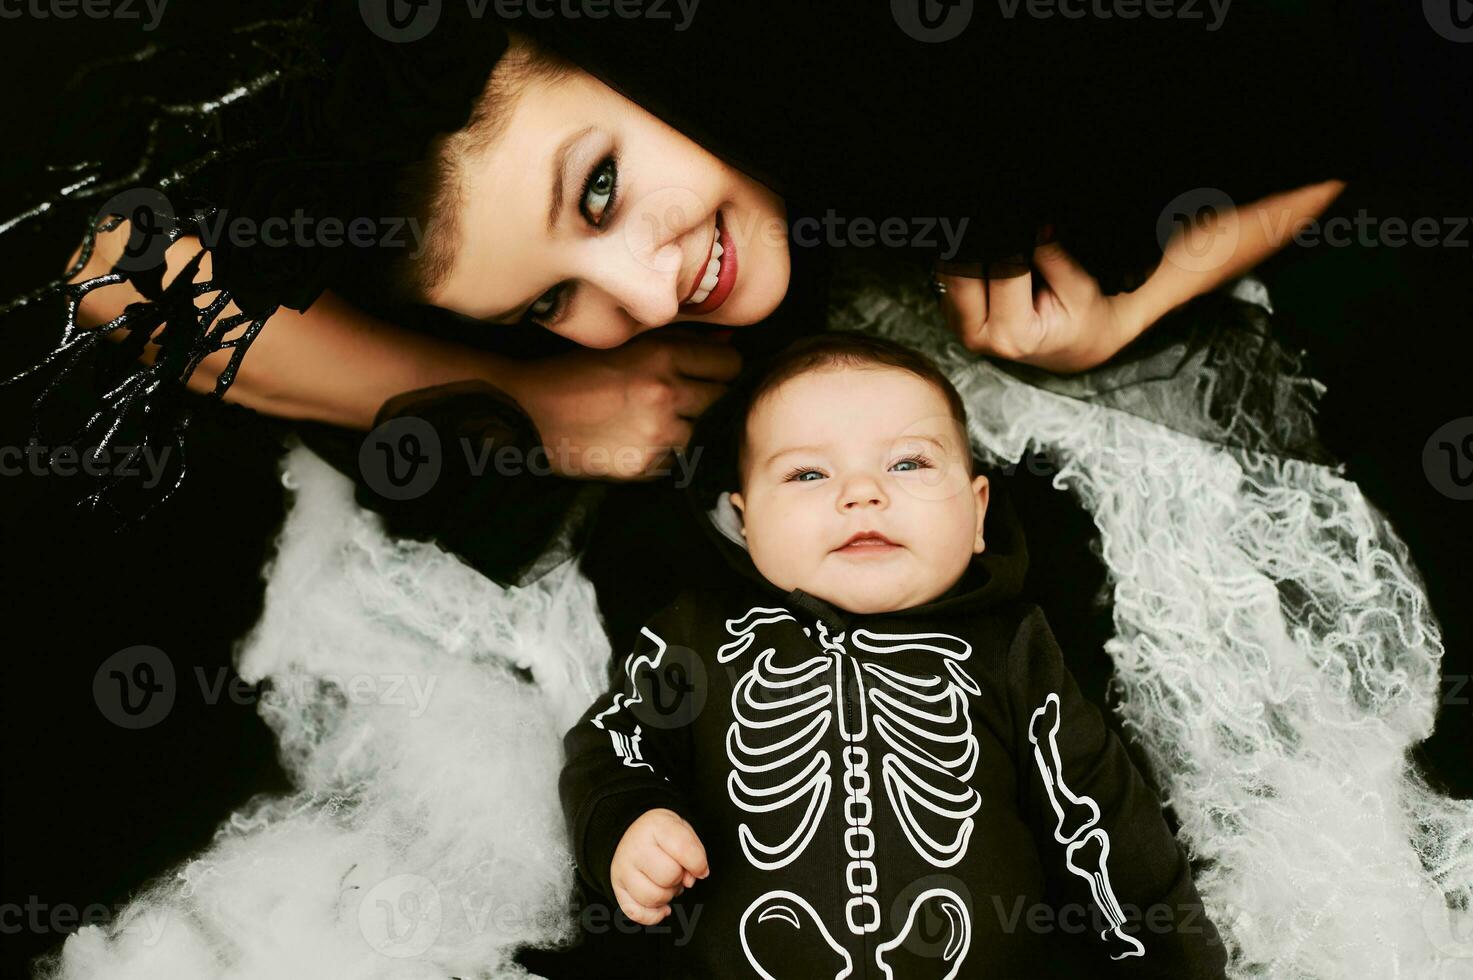 Halloween portrait of adorable baby wearing skeleton costume, posing on black background covered with spider web, mother wearing witch costume lying next to baby photo